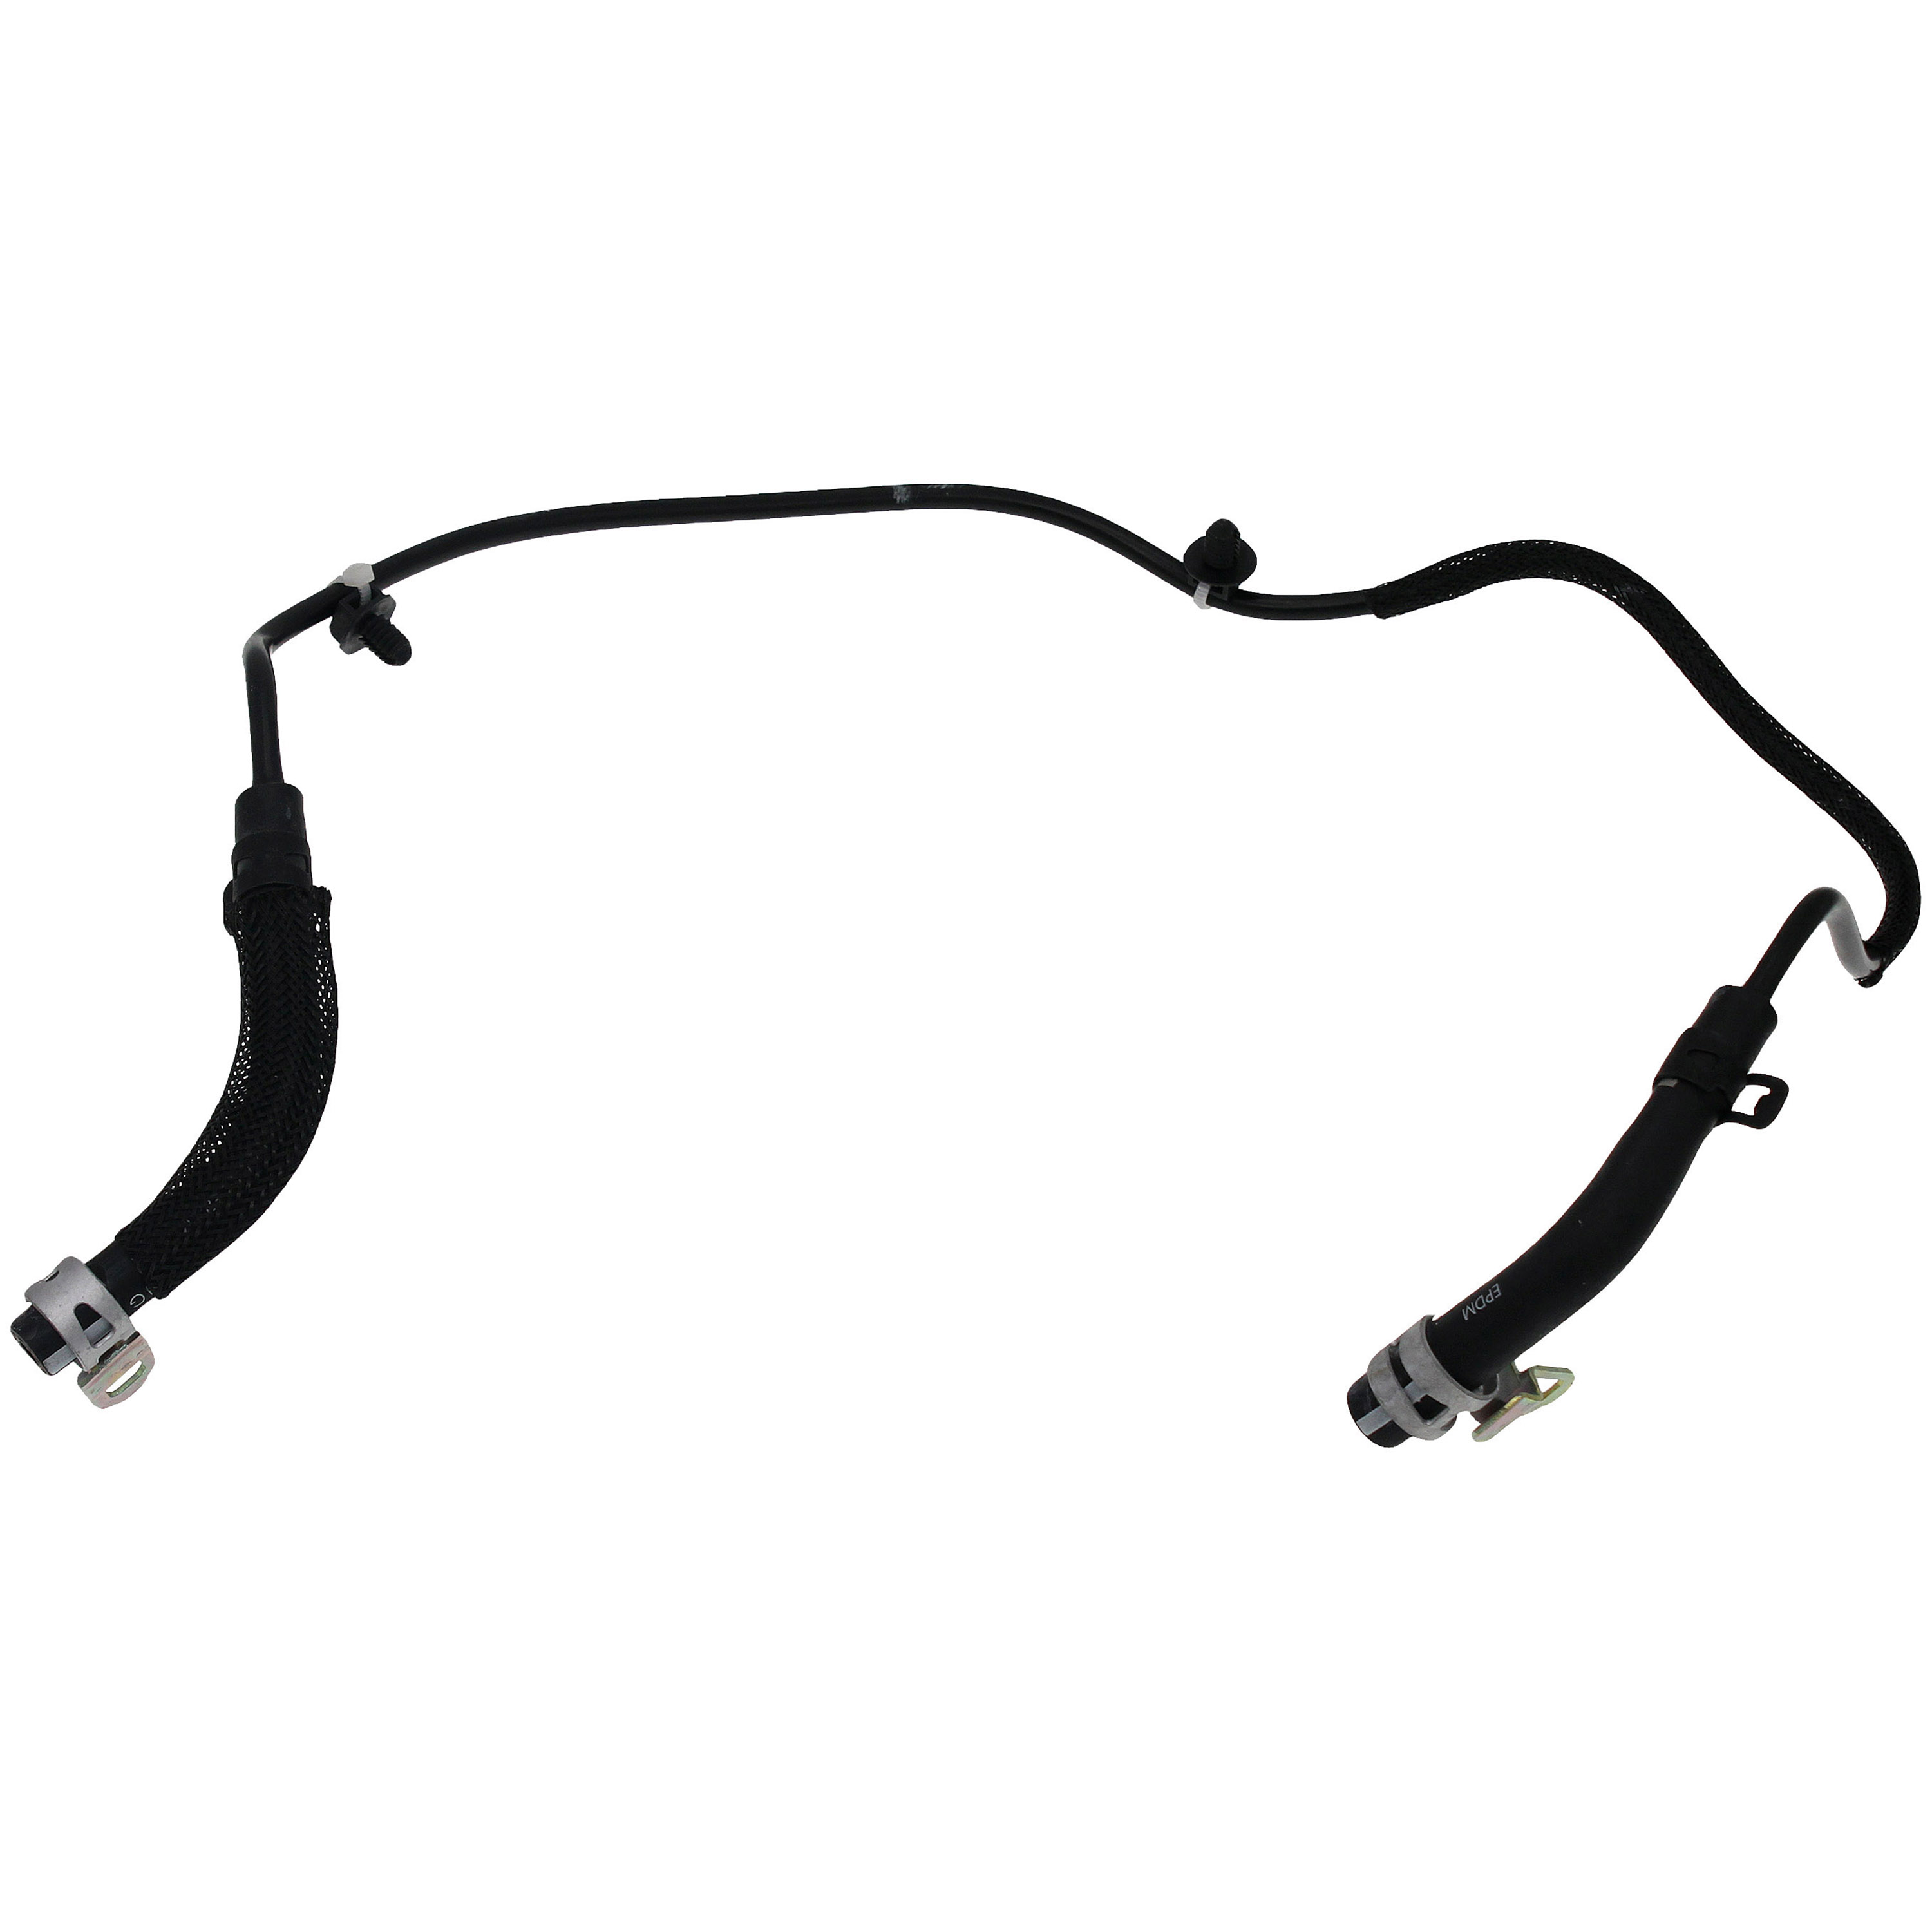 Dorman 626-786 Engine Coolant Overflow Hose for Specific Ford / Lincoln Models Fits select: 2015-2018 FORD EDGE, 2016-2018 LINCOLN MKX - image 1 of 4